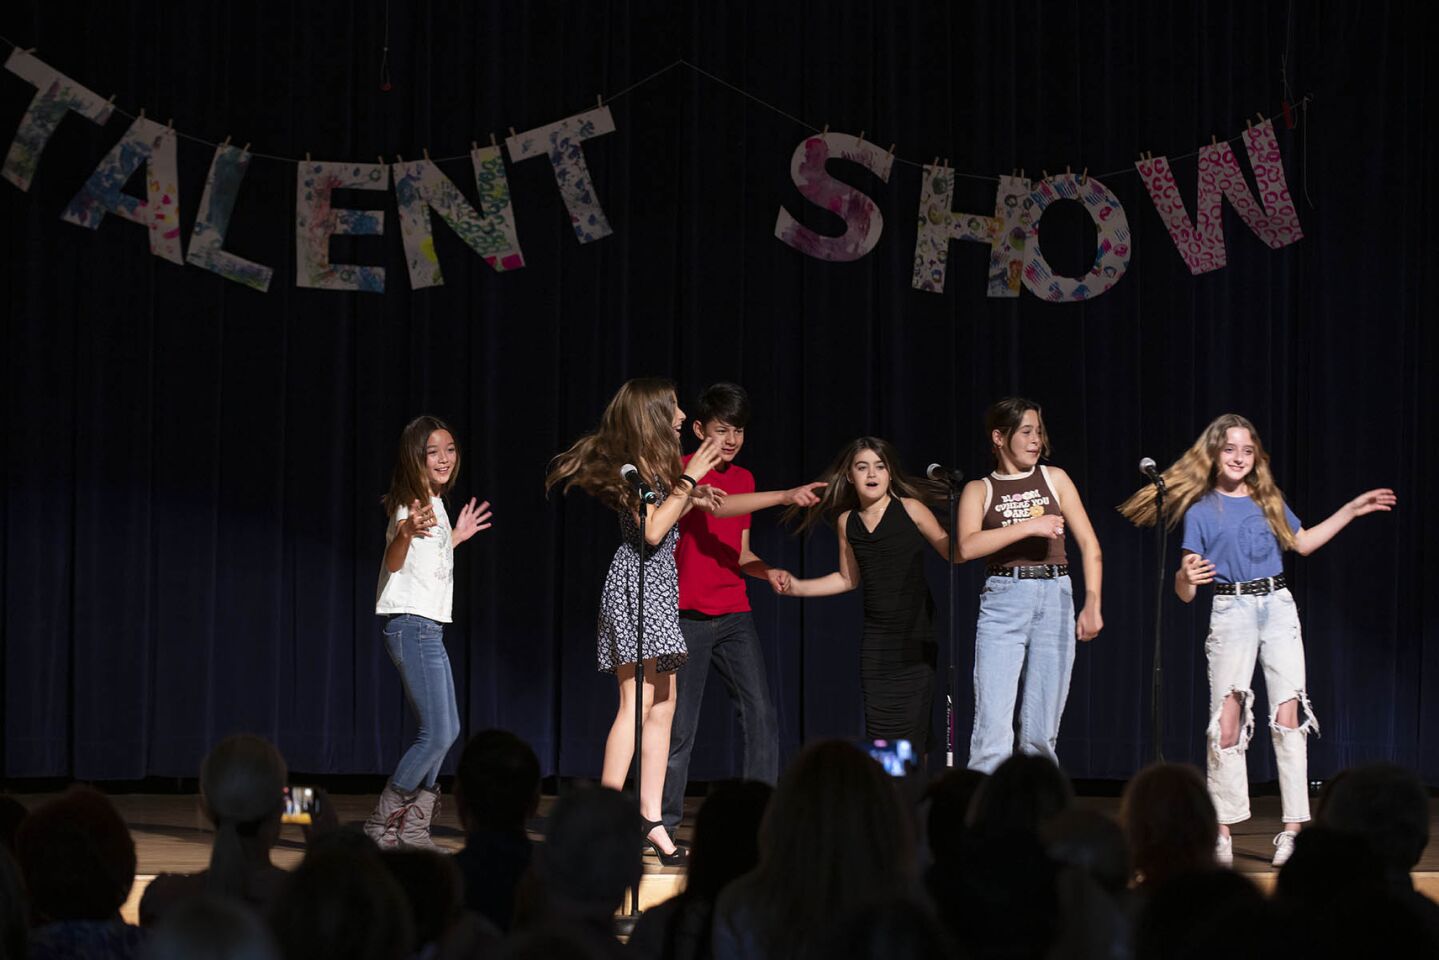 The evening started with a Del Mar Heights chant performed by "The Sixth Grade Superstars"